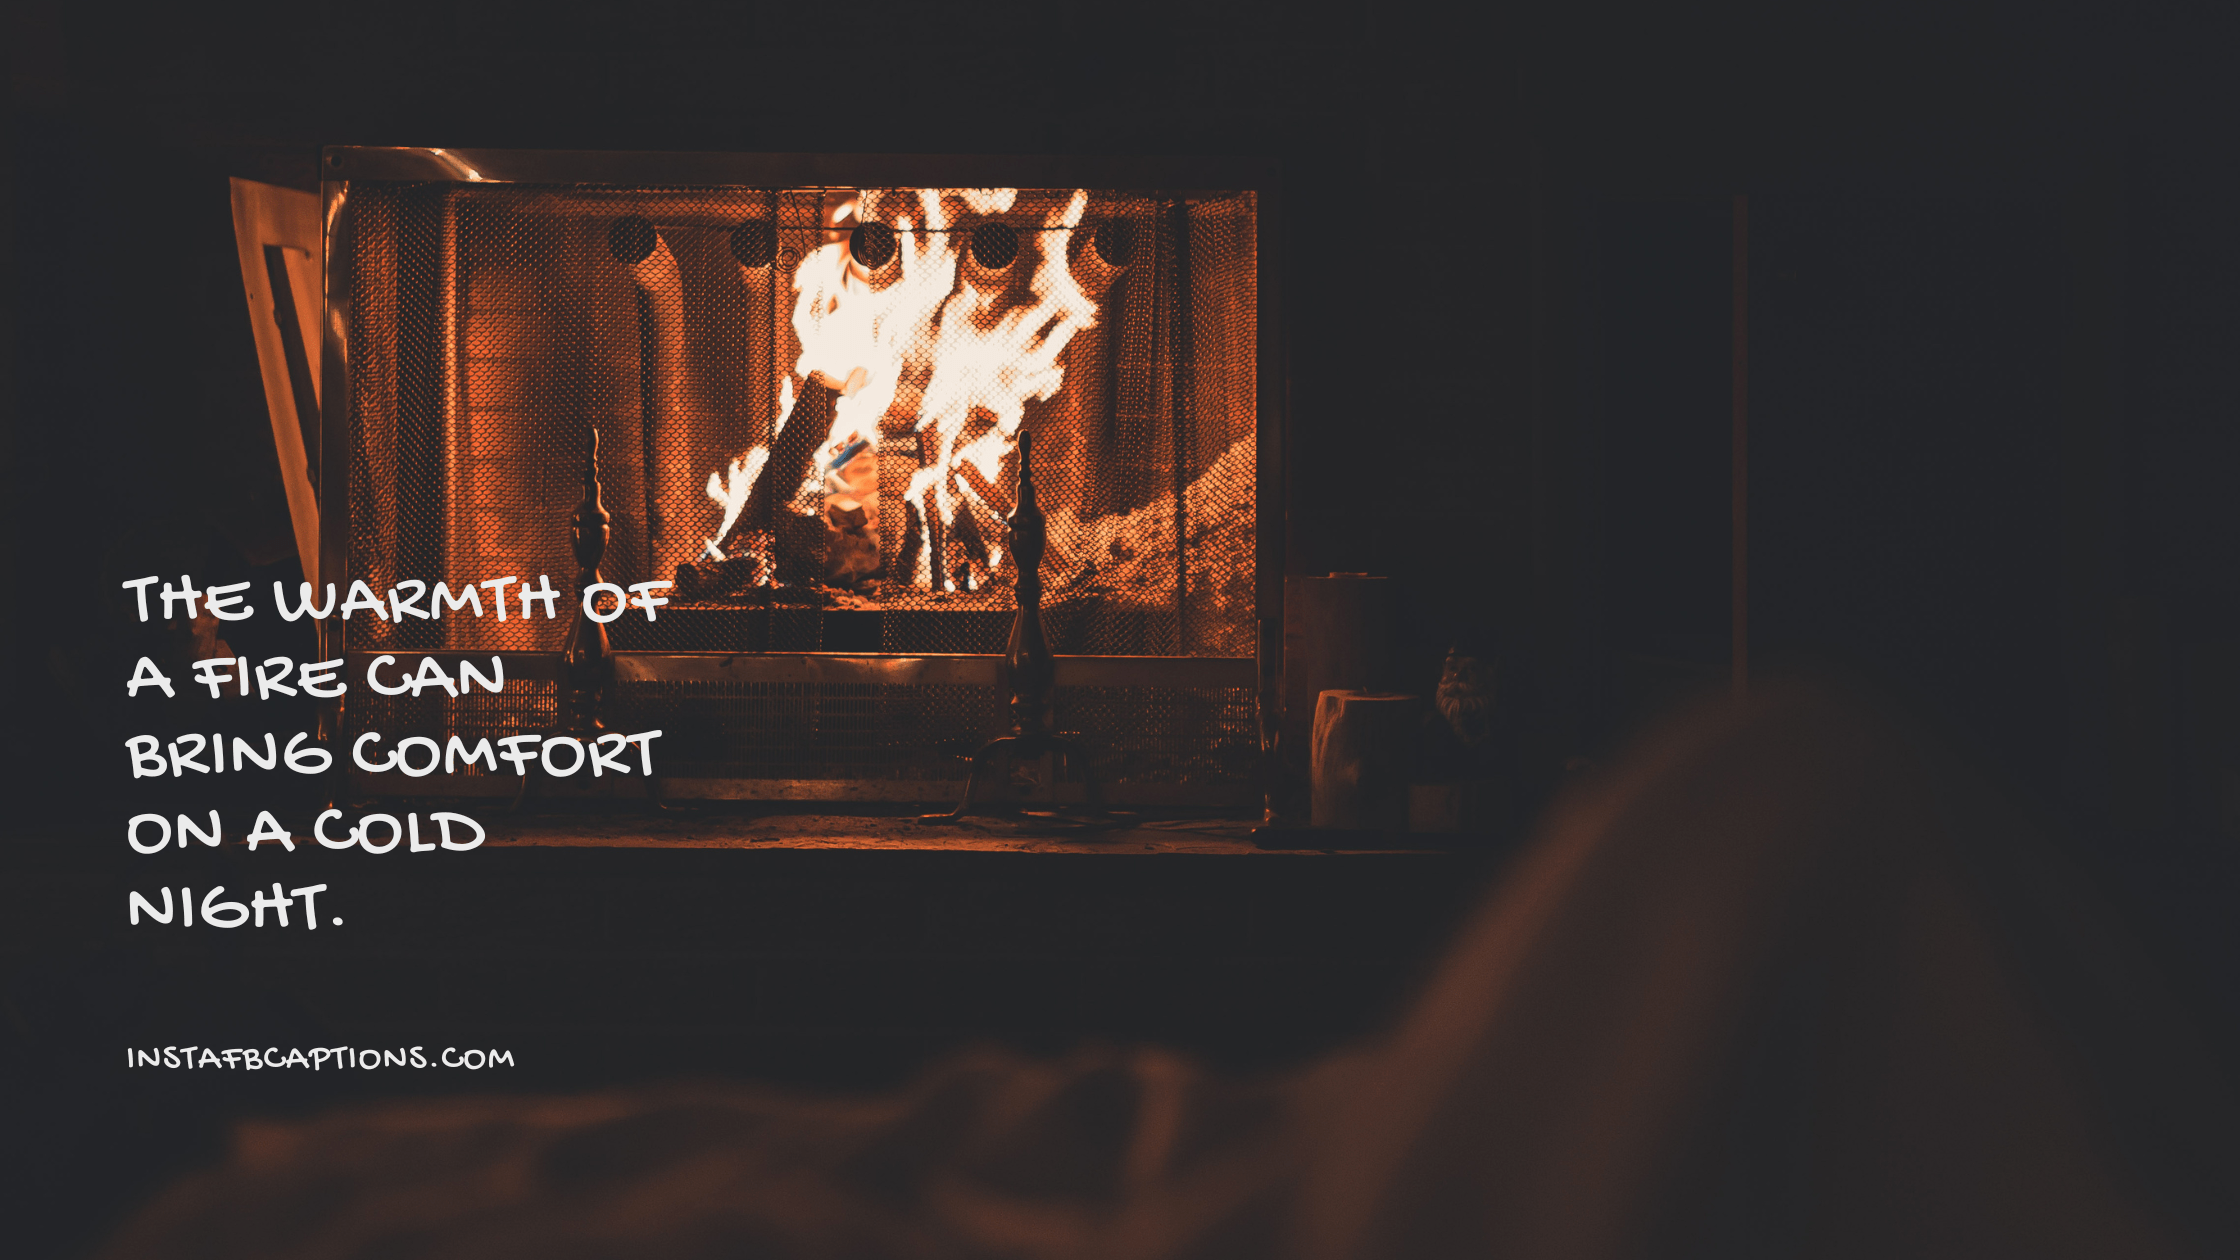 The warmth of a fire can bring comfort on a cold night.  - 2022 Fire Instagram Captions - [NEW] Fire Captions Quotes For Instagram in 2023